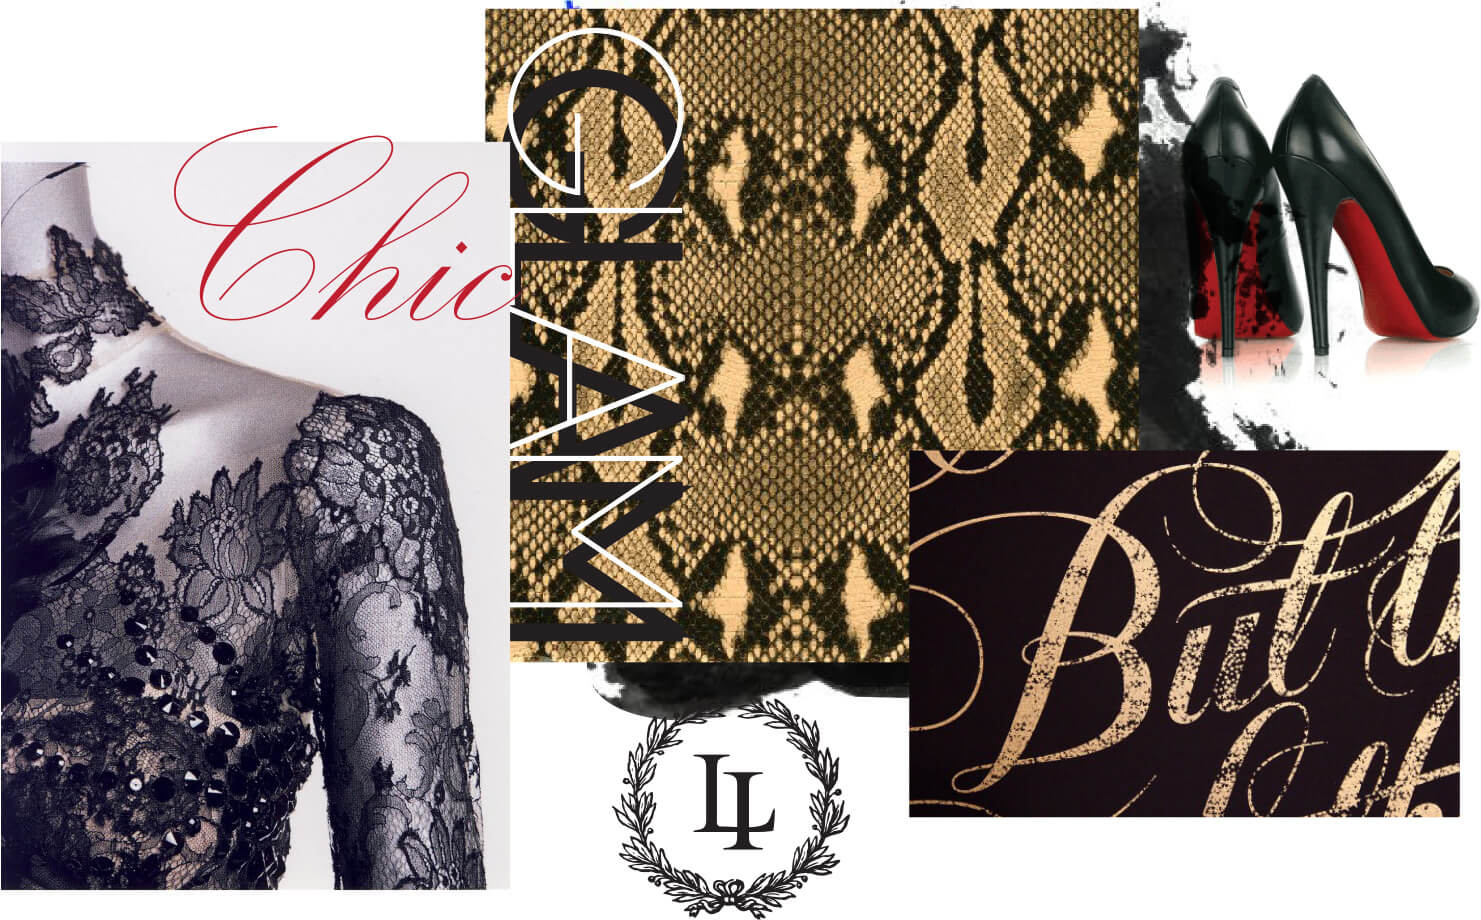 Christian Louboutin, black lace and typography inspired images